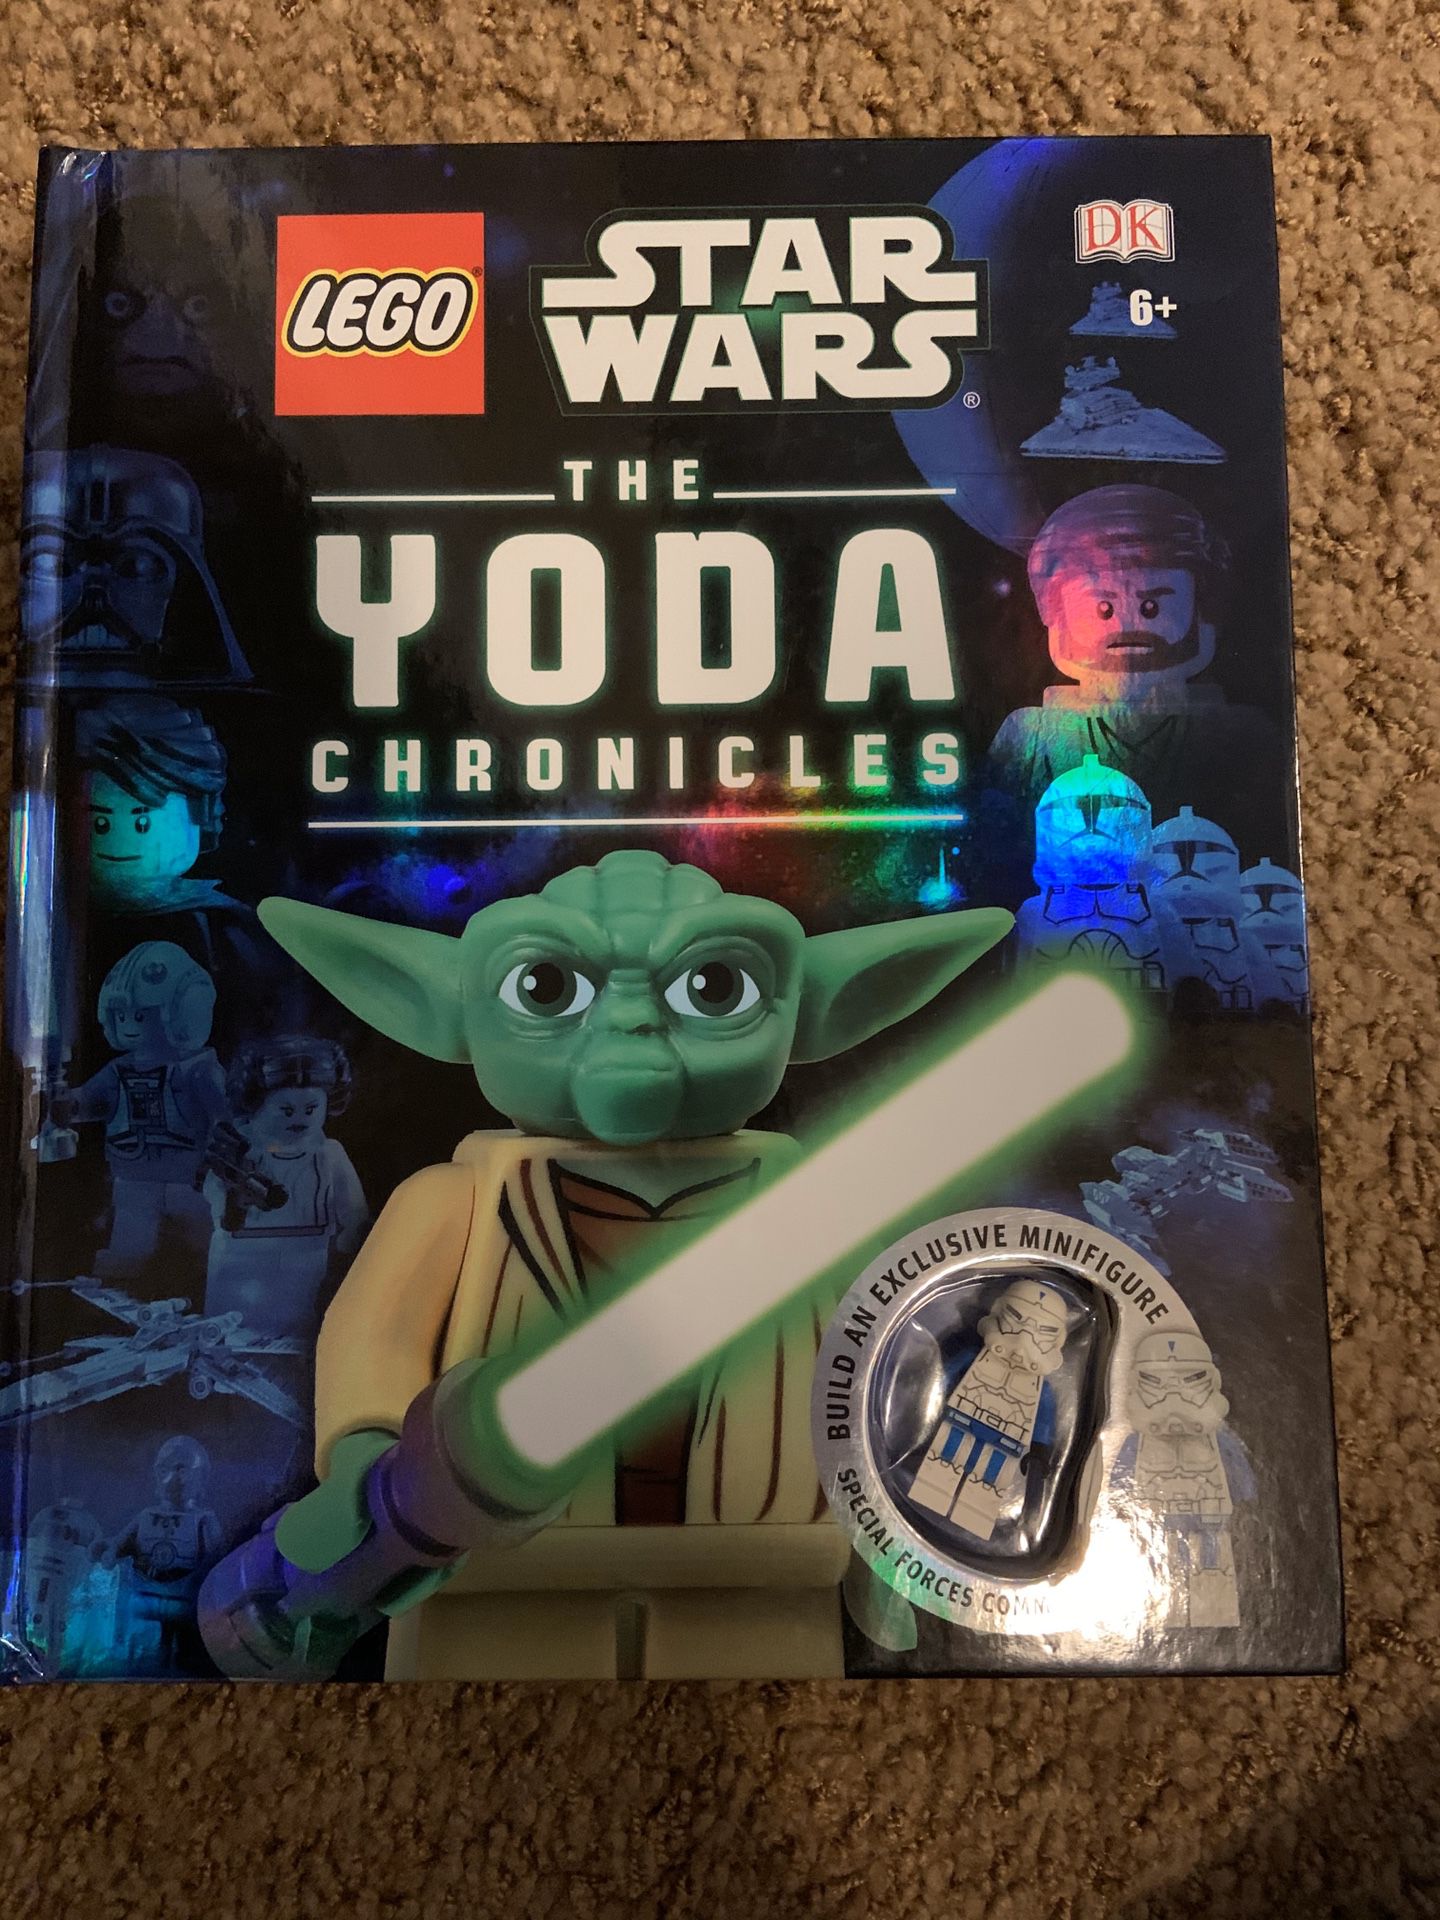 LEGO Star Wars The Yoda Chronicles with Minifigure